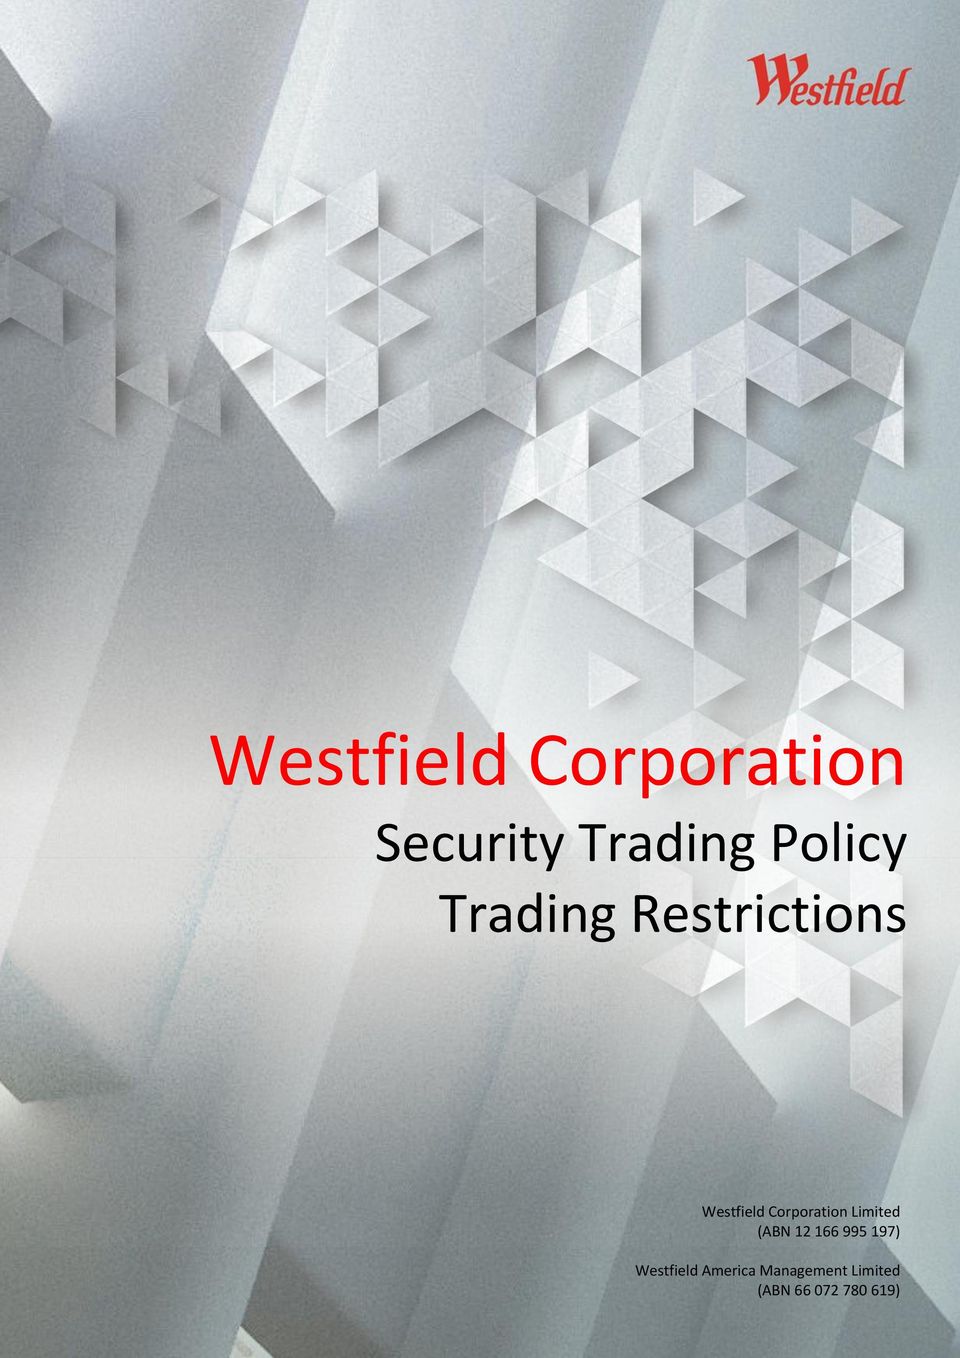 197) Westfield America Management Limited (ABN 66 072 780